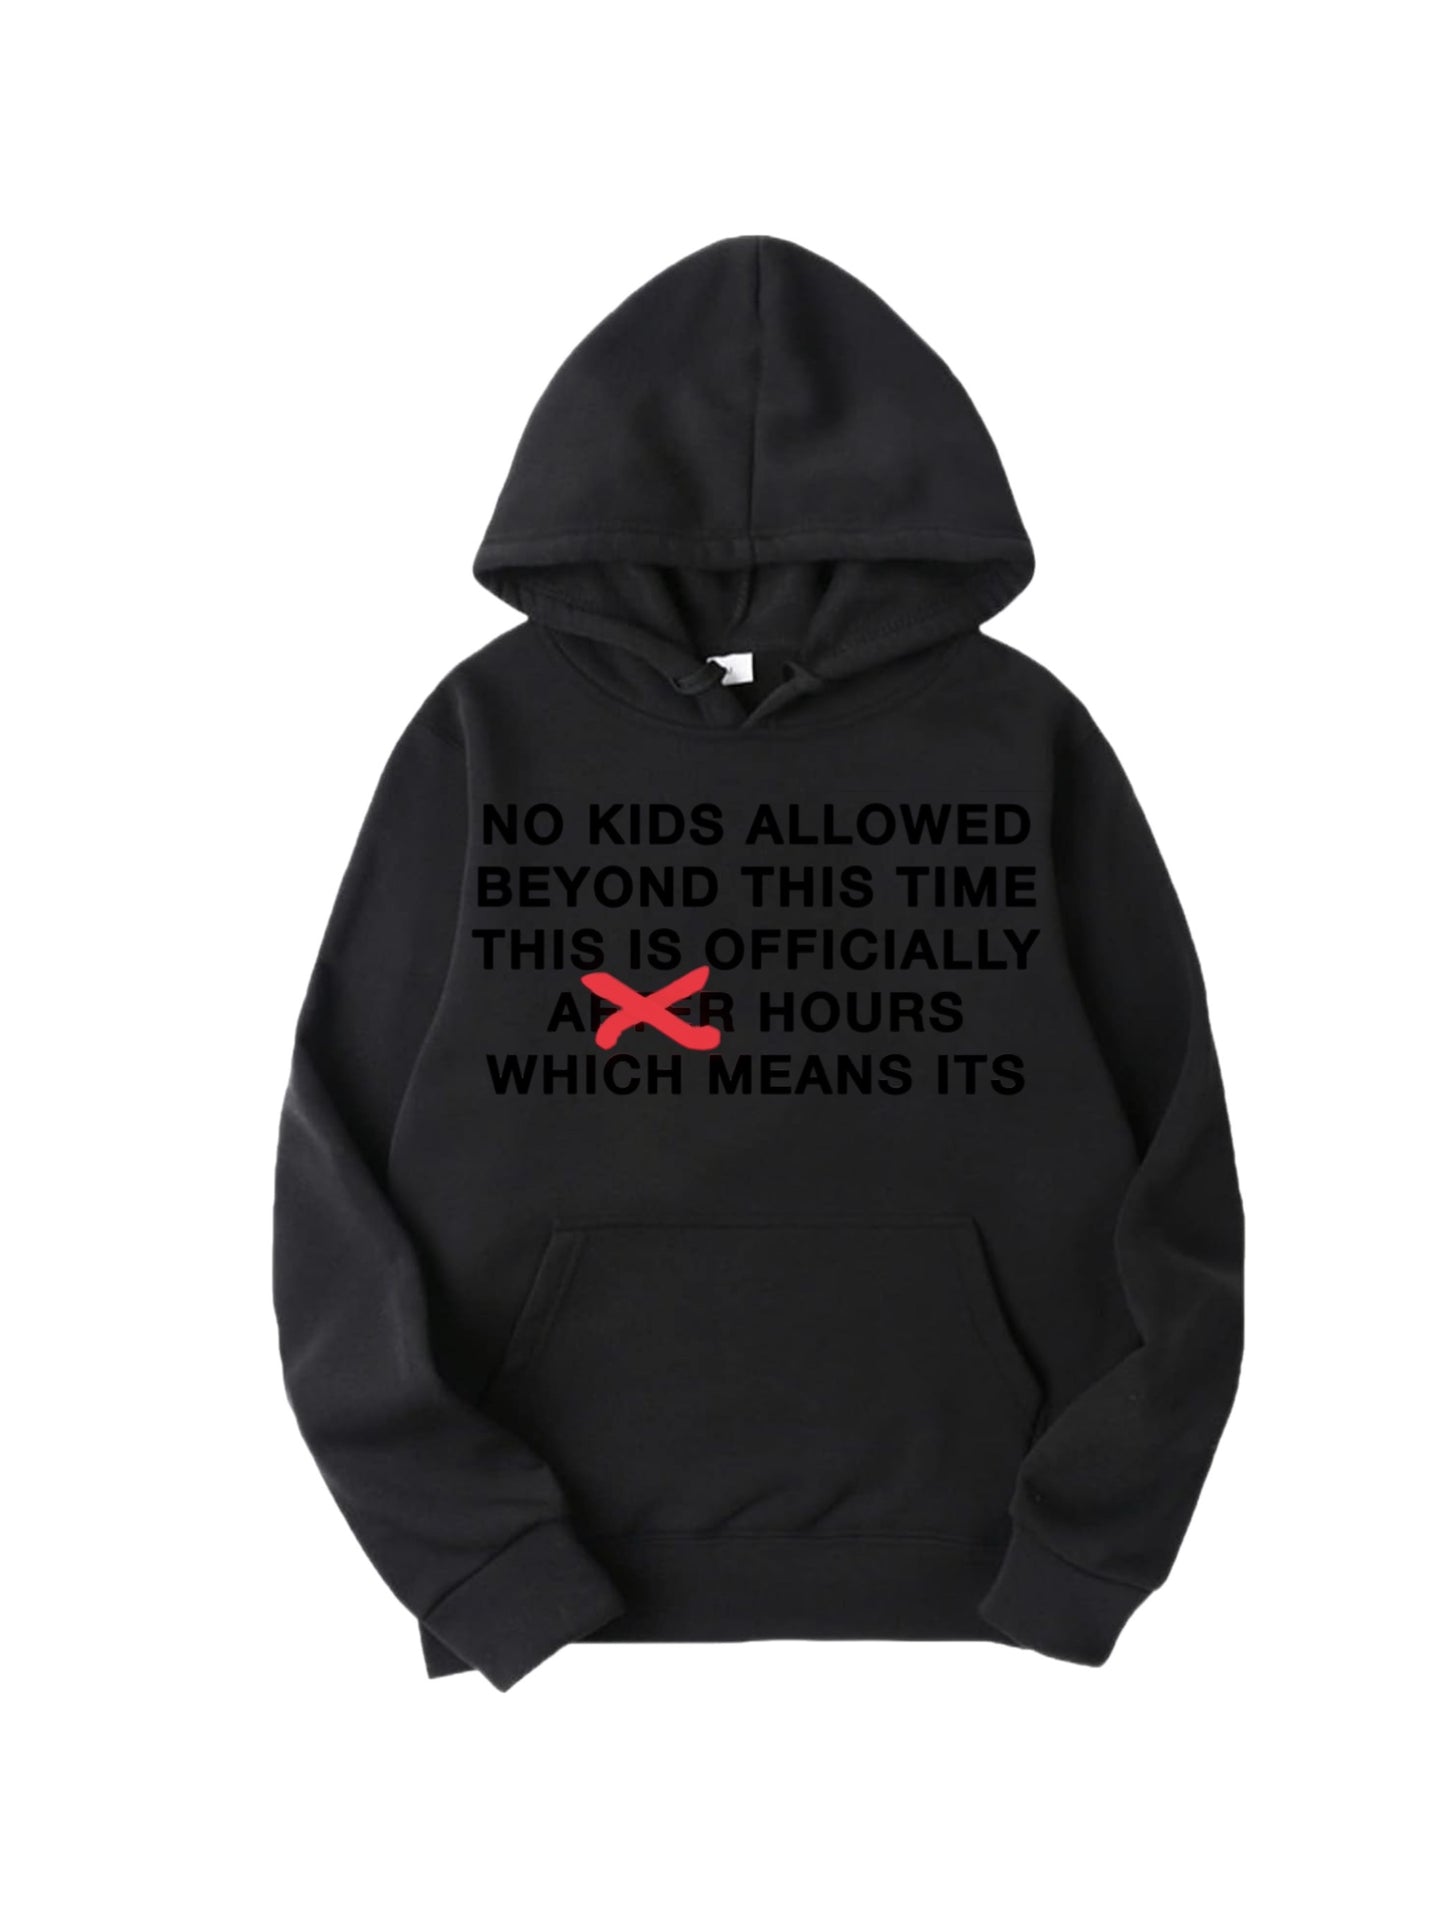 Scary after hours hoodies